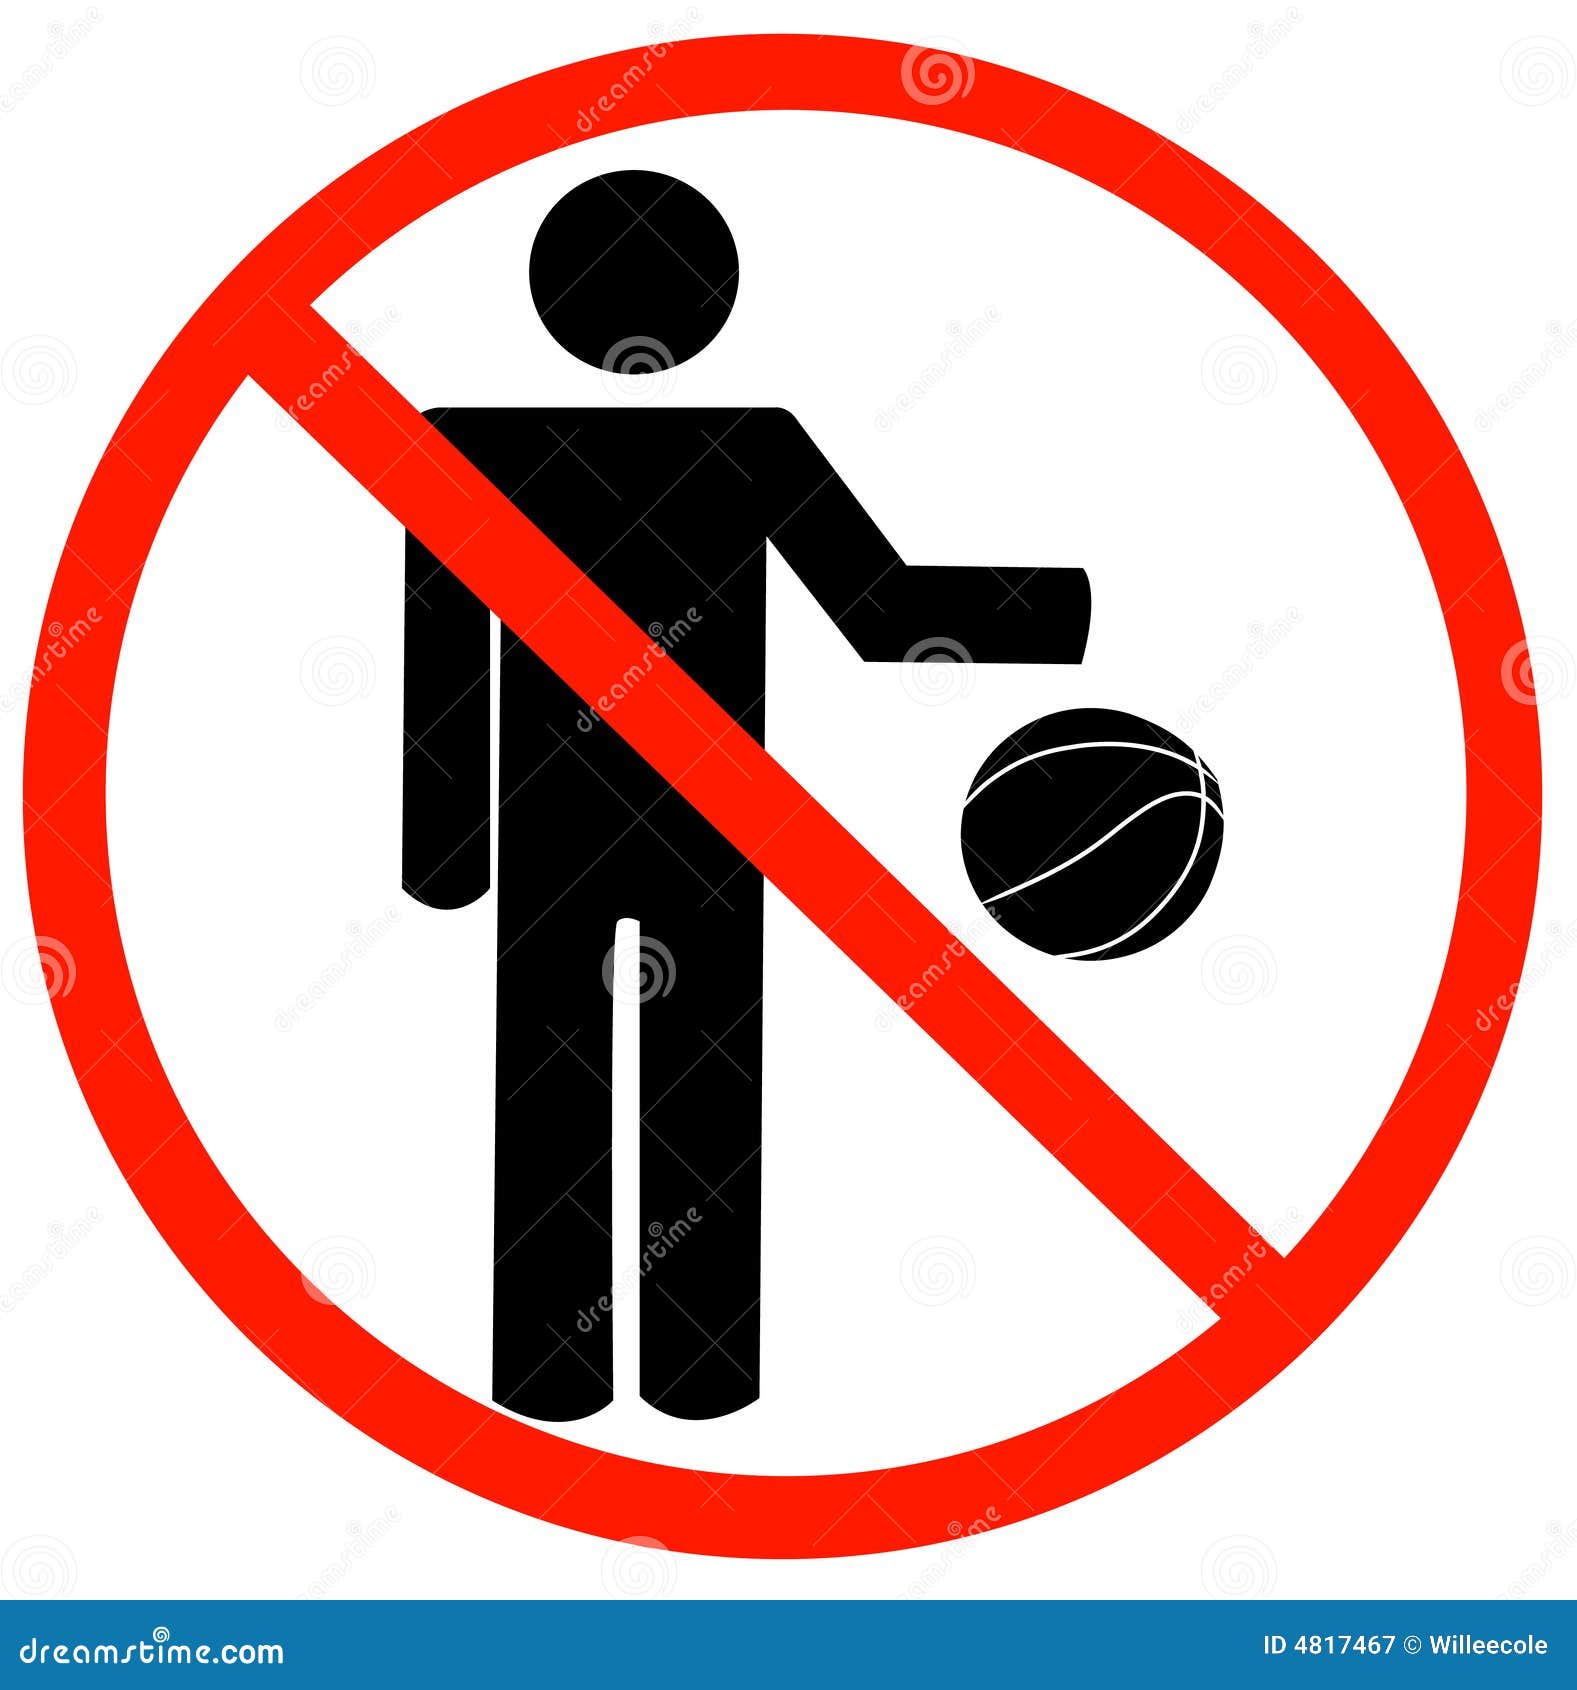 No playing allowed stock vector. Illustration of bounce - 4817467